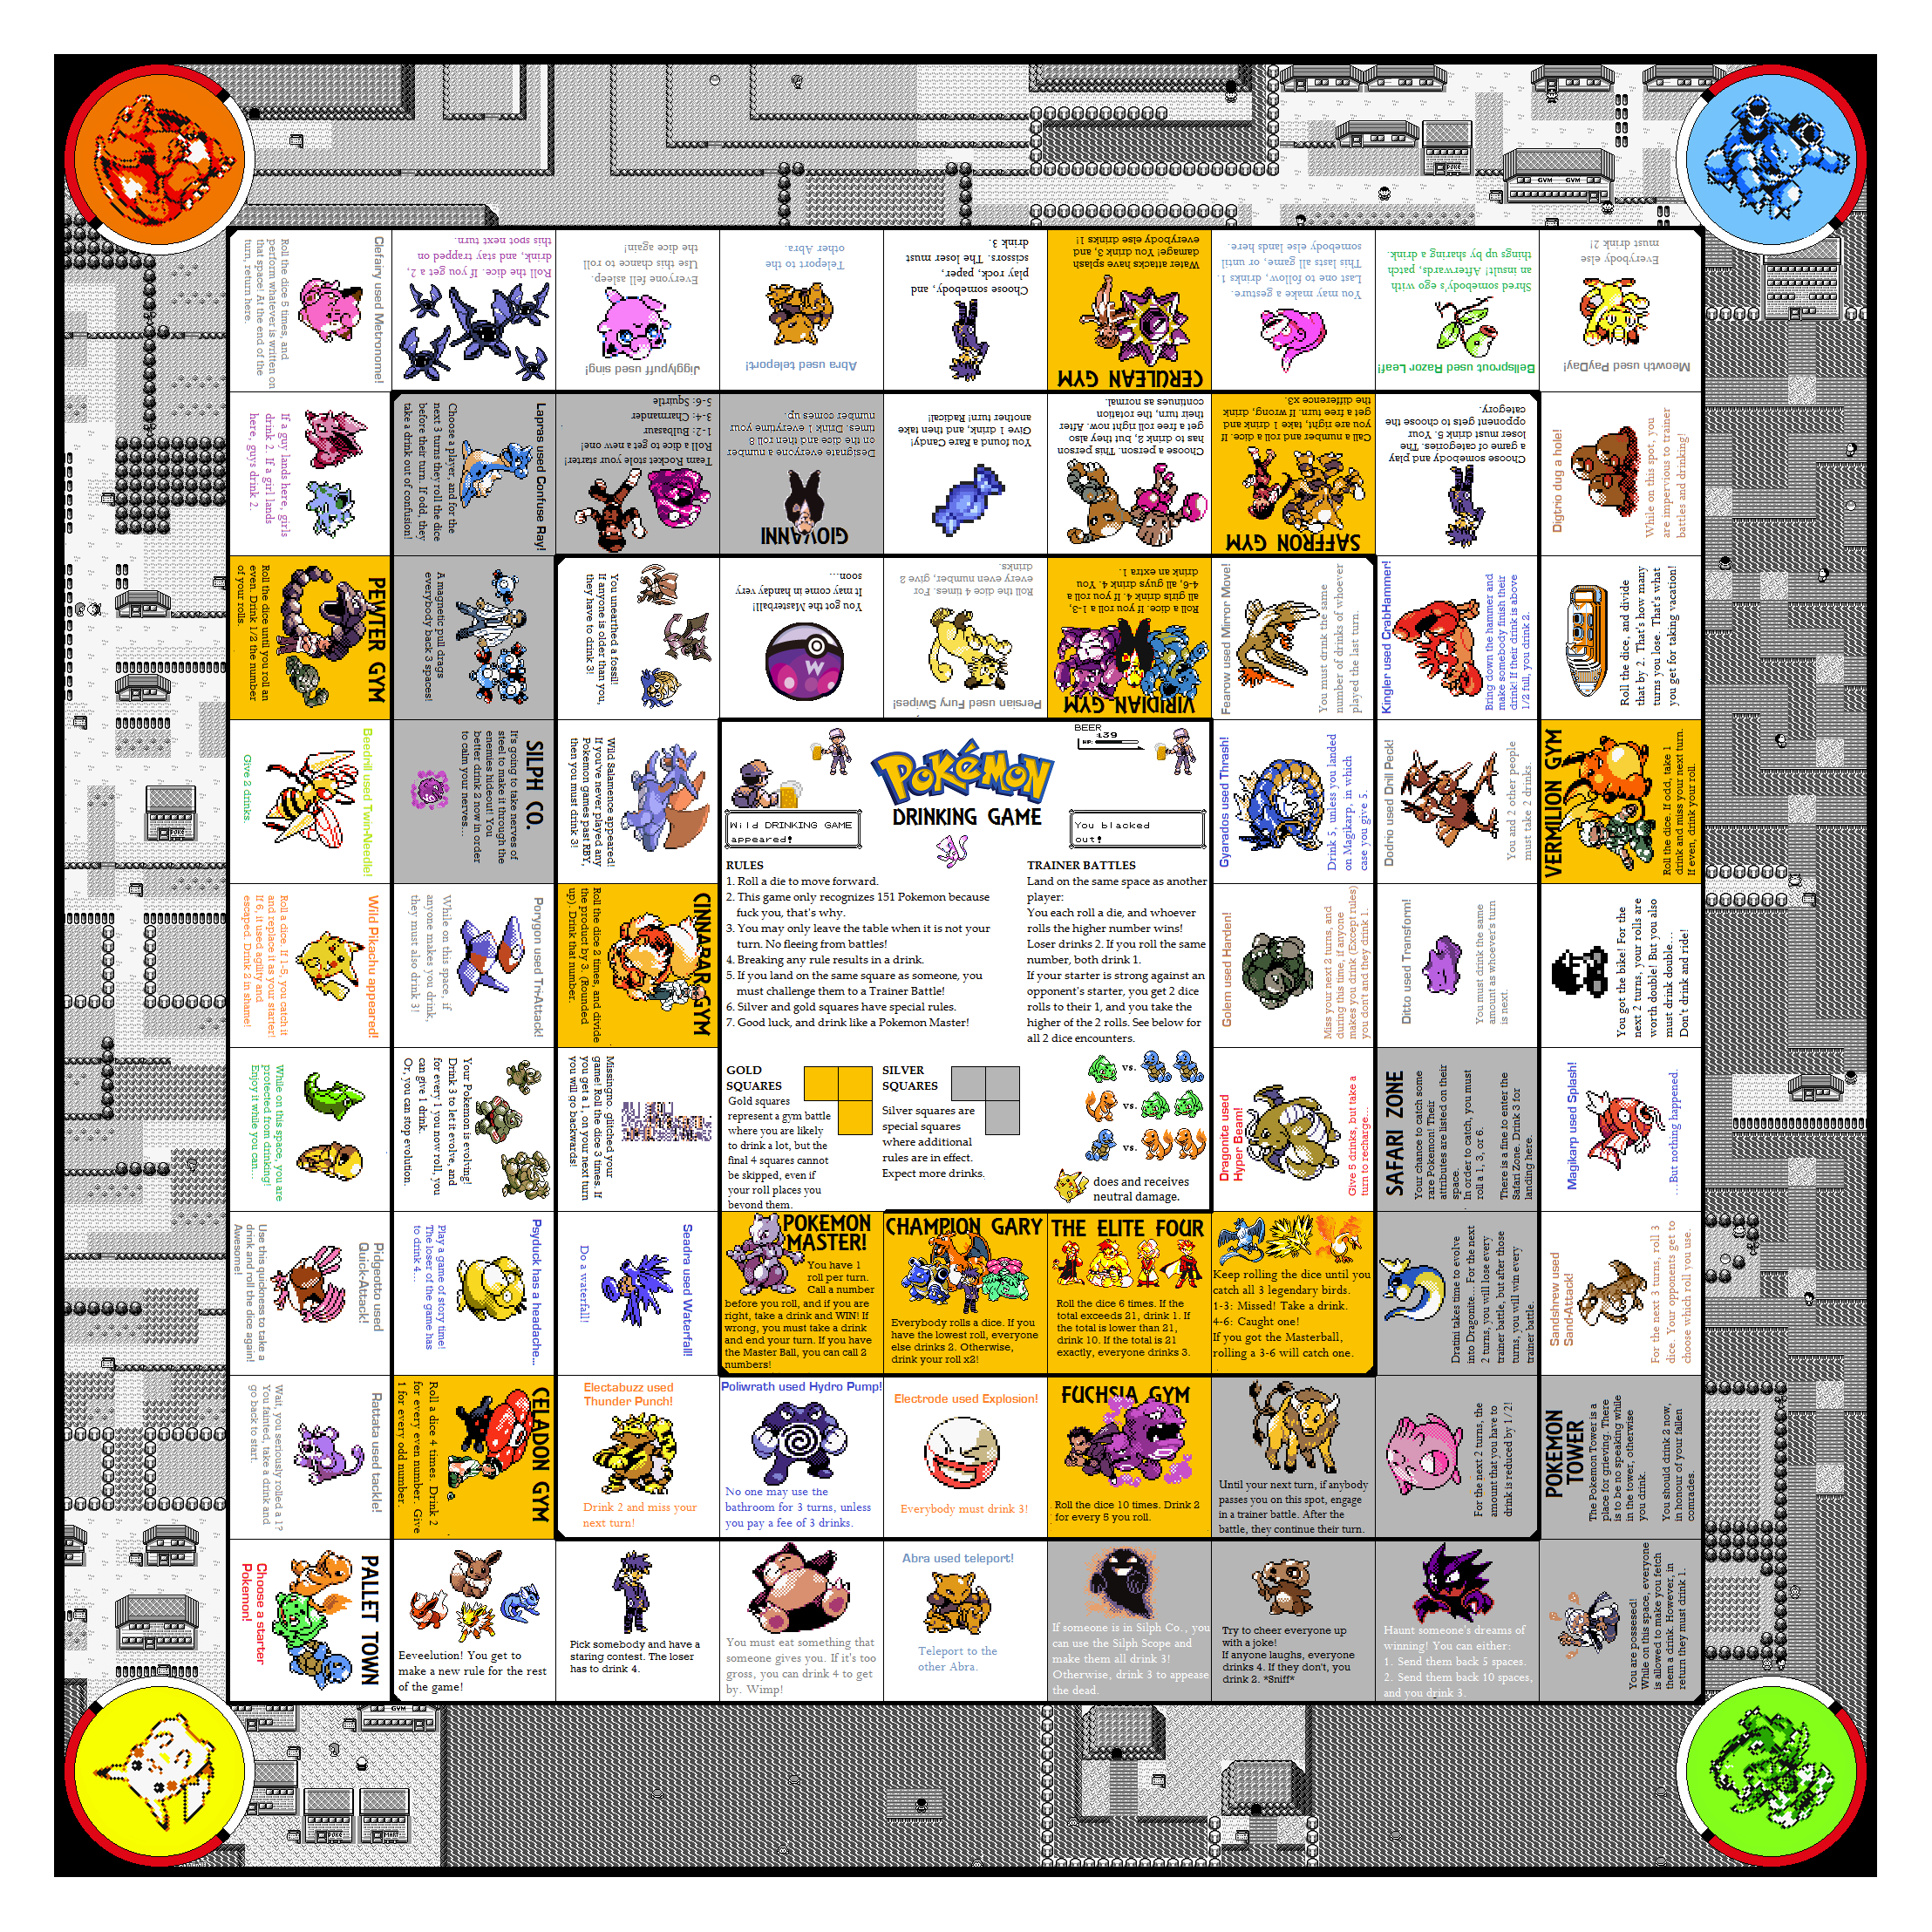 Game Printable Images Gallery Category Page 4